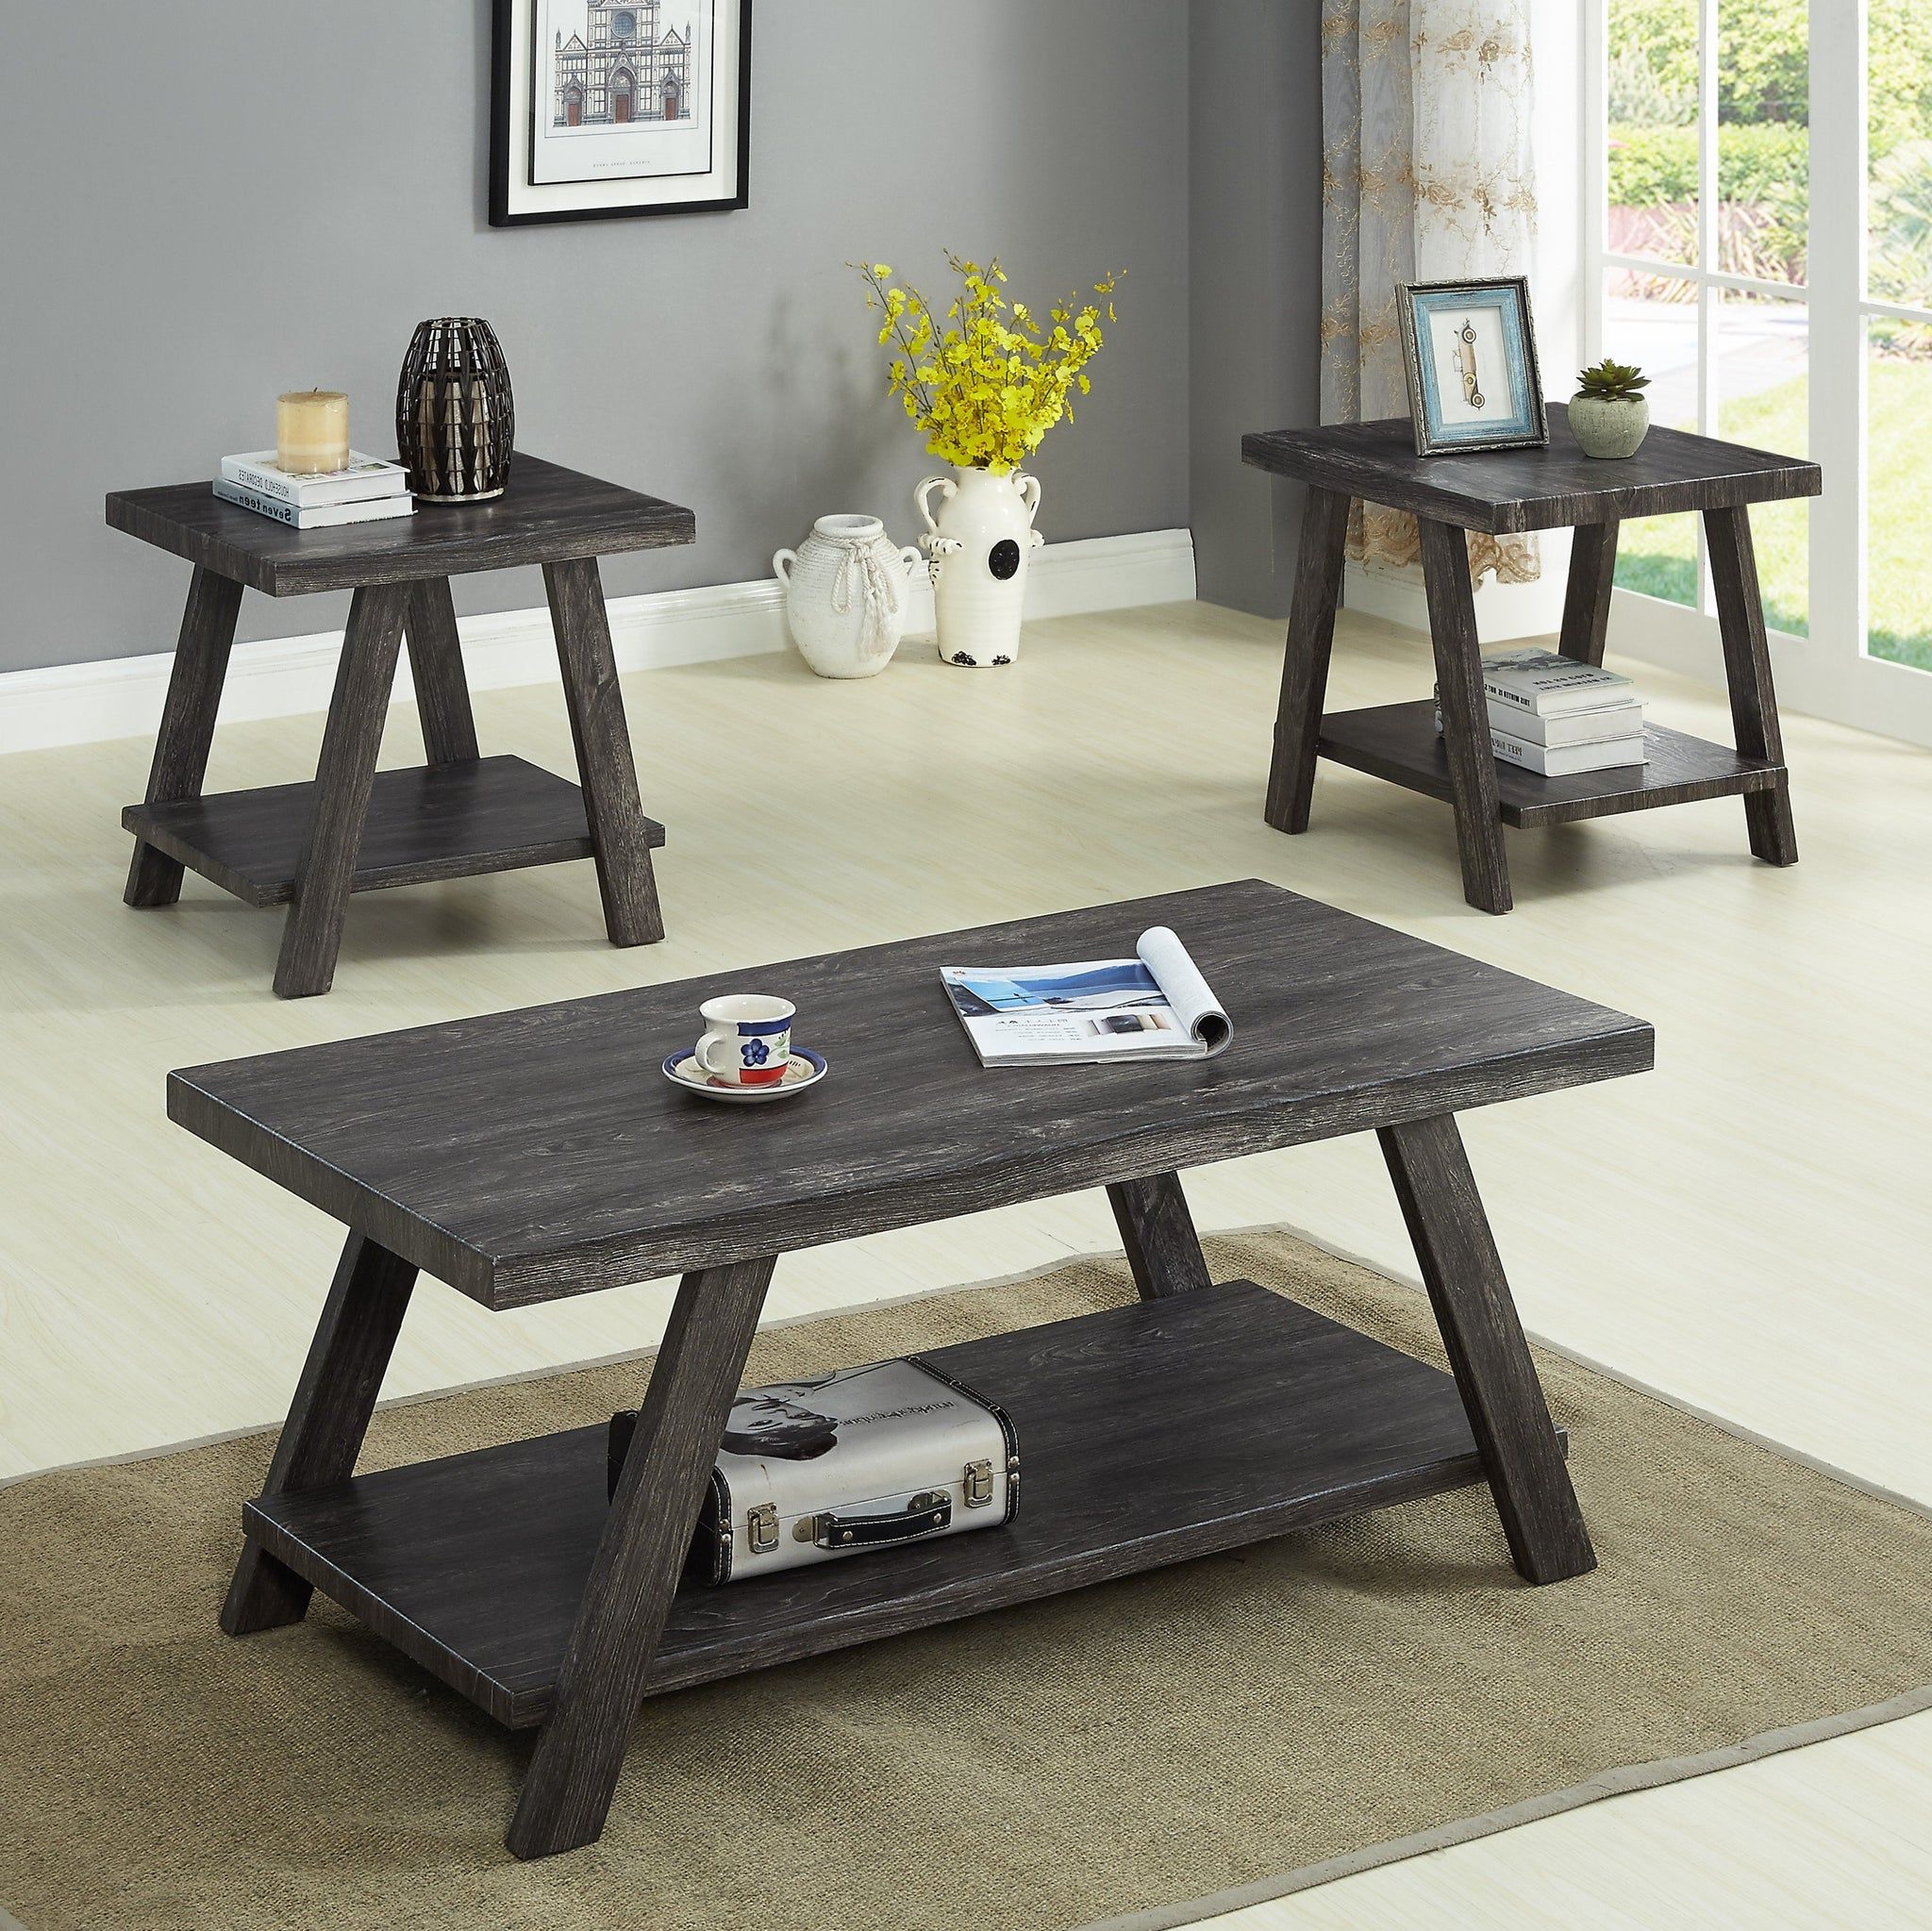 Athens Contemporary Replicated Wood Shelf Coffee Set Table In Charcoal With Pemberly Row Replicated Wood Coffee Tables (View 6 of 20)